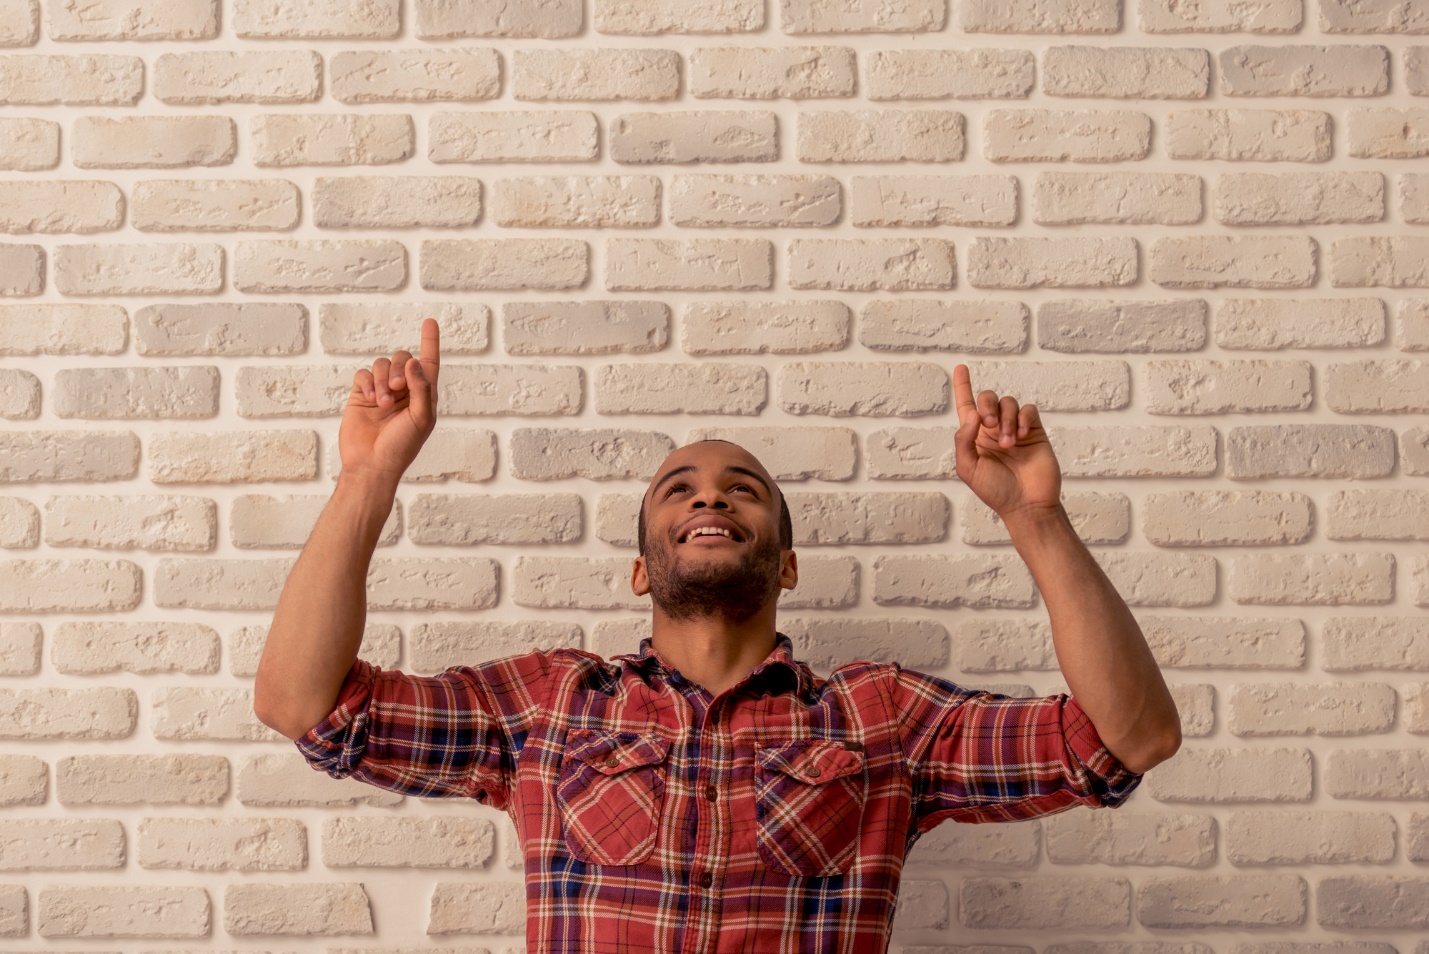 A person sitting in front of a brick wall with his hands up

Description automatically generated with medium confidence